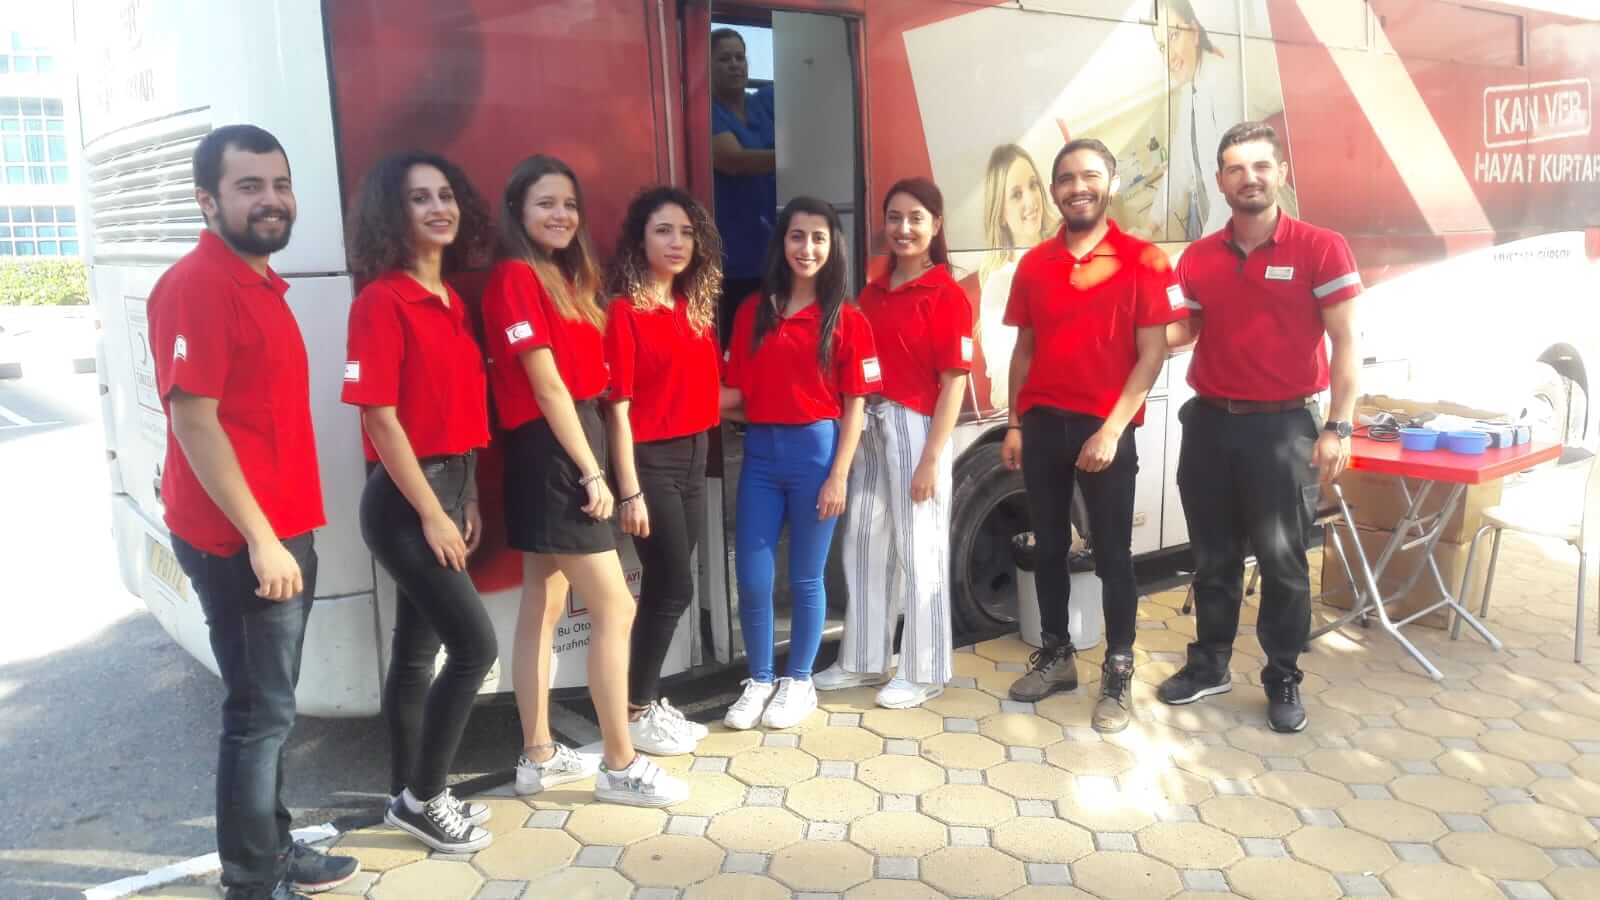 As part of the “The Red Crescent on Campus” project, 161 units of blood donations were collected on Near East University Campus